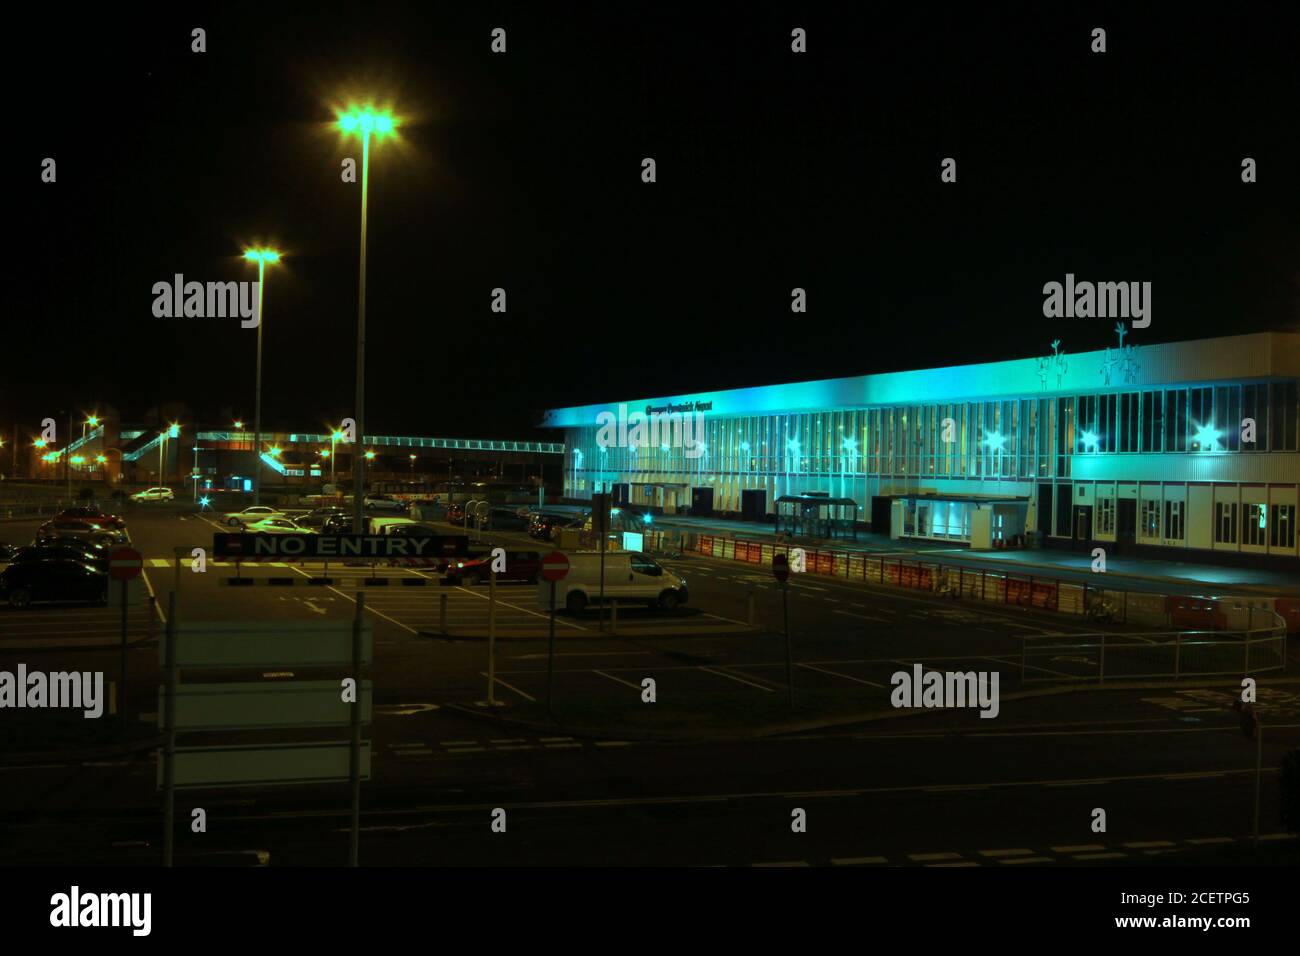 Glasgow Prestwick Airport, Ayrshire, Scotland,15 March 2014, Terminal building illuminated green for St Patrick's Day Stock Photo